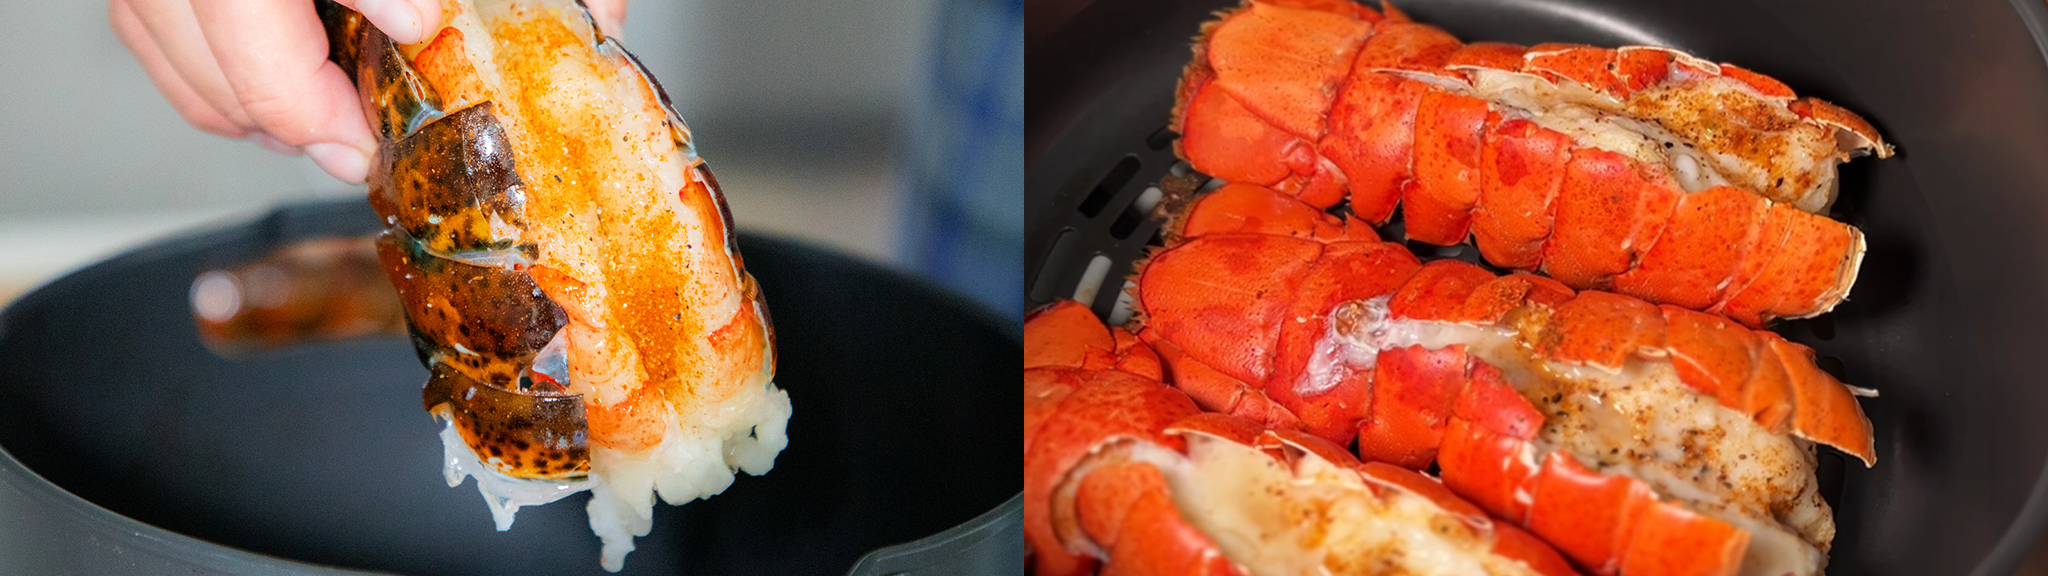 How to Cook Maine Lobster Tails and Products in an Air Fryer recipe image